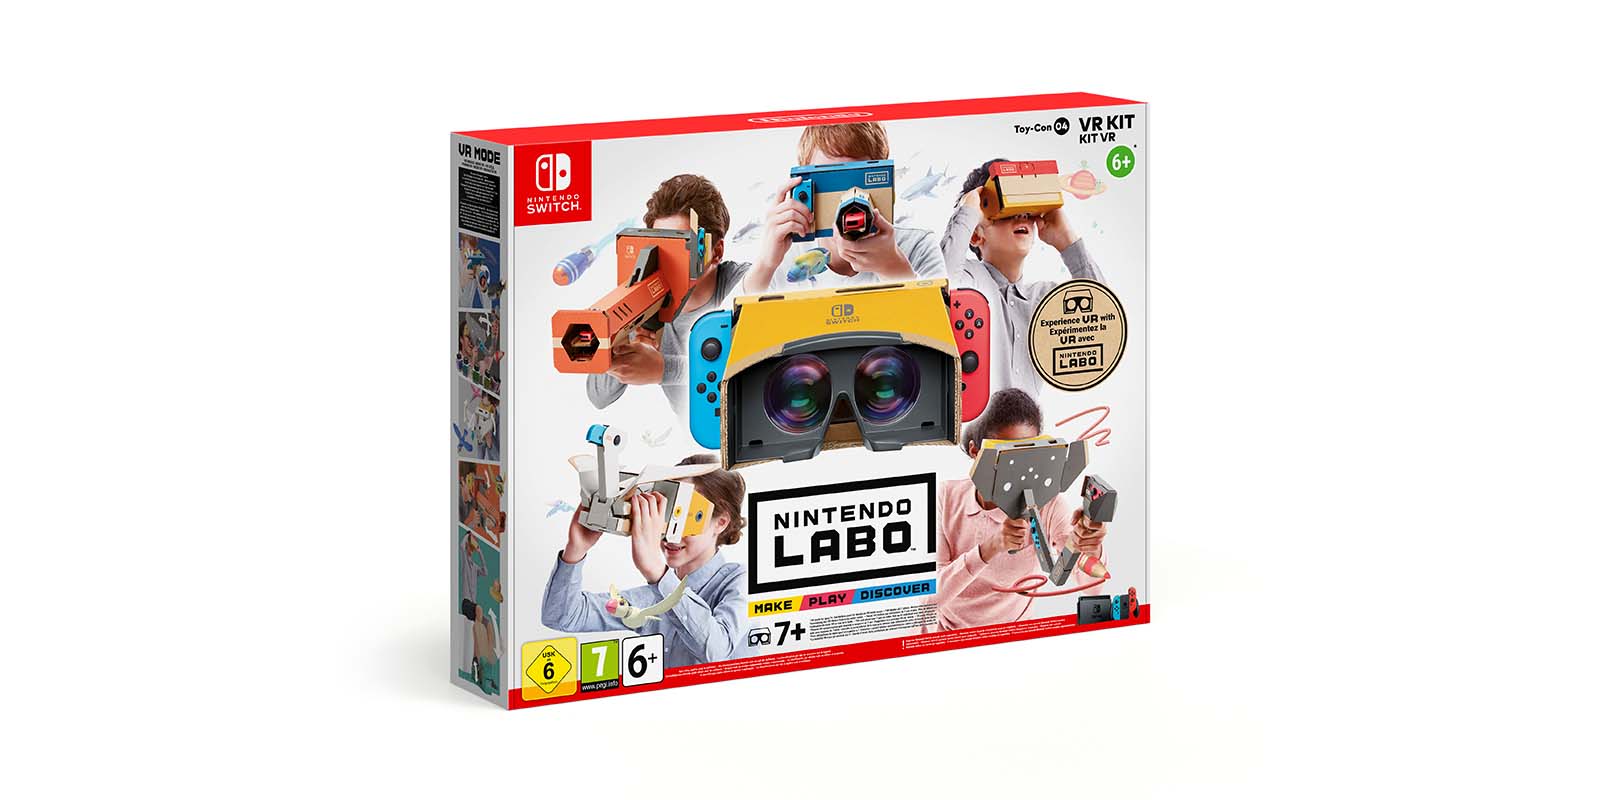 Nintendo introduces new gaming experiences to the world again with Nintendo Labo: VR Kit